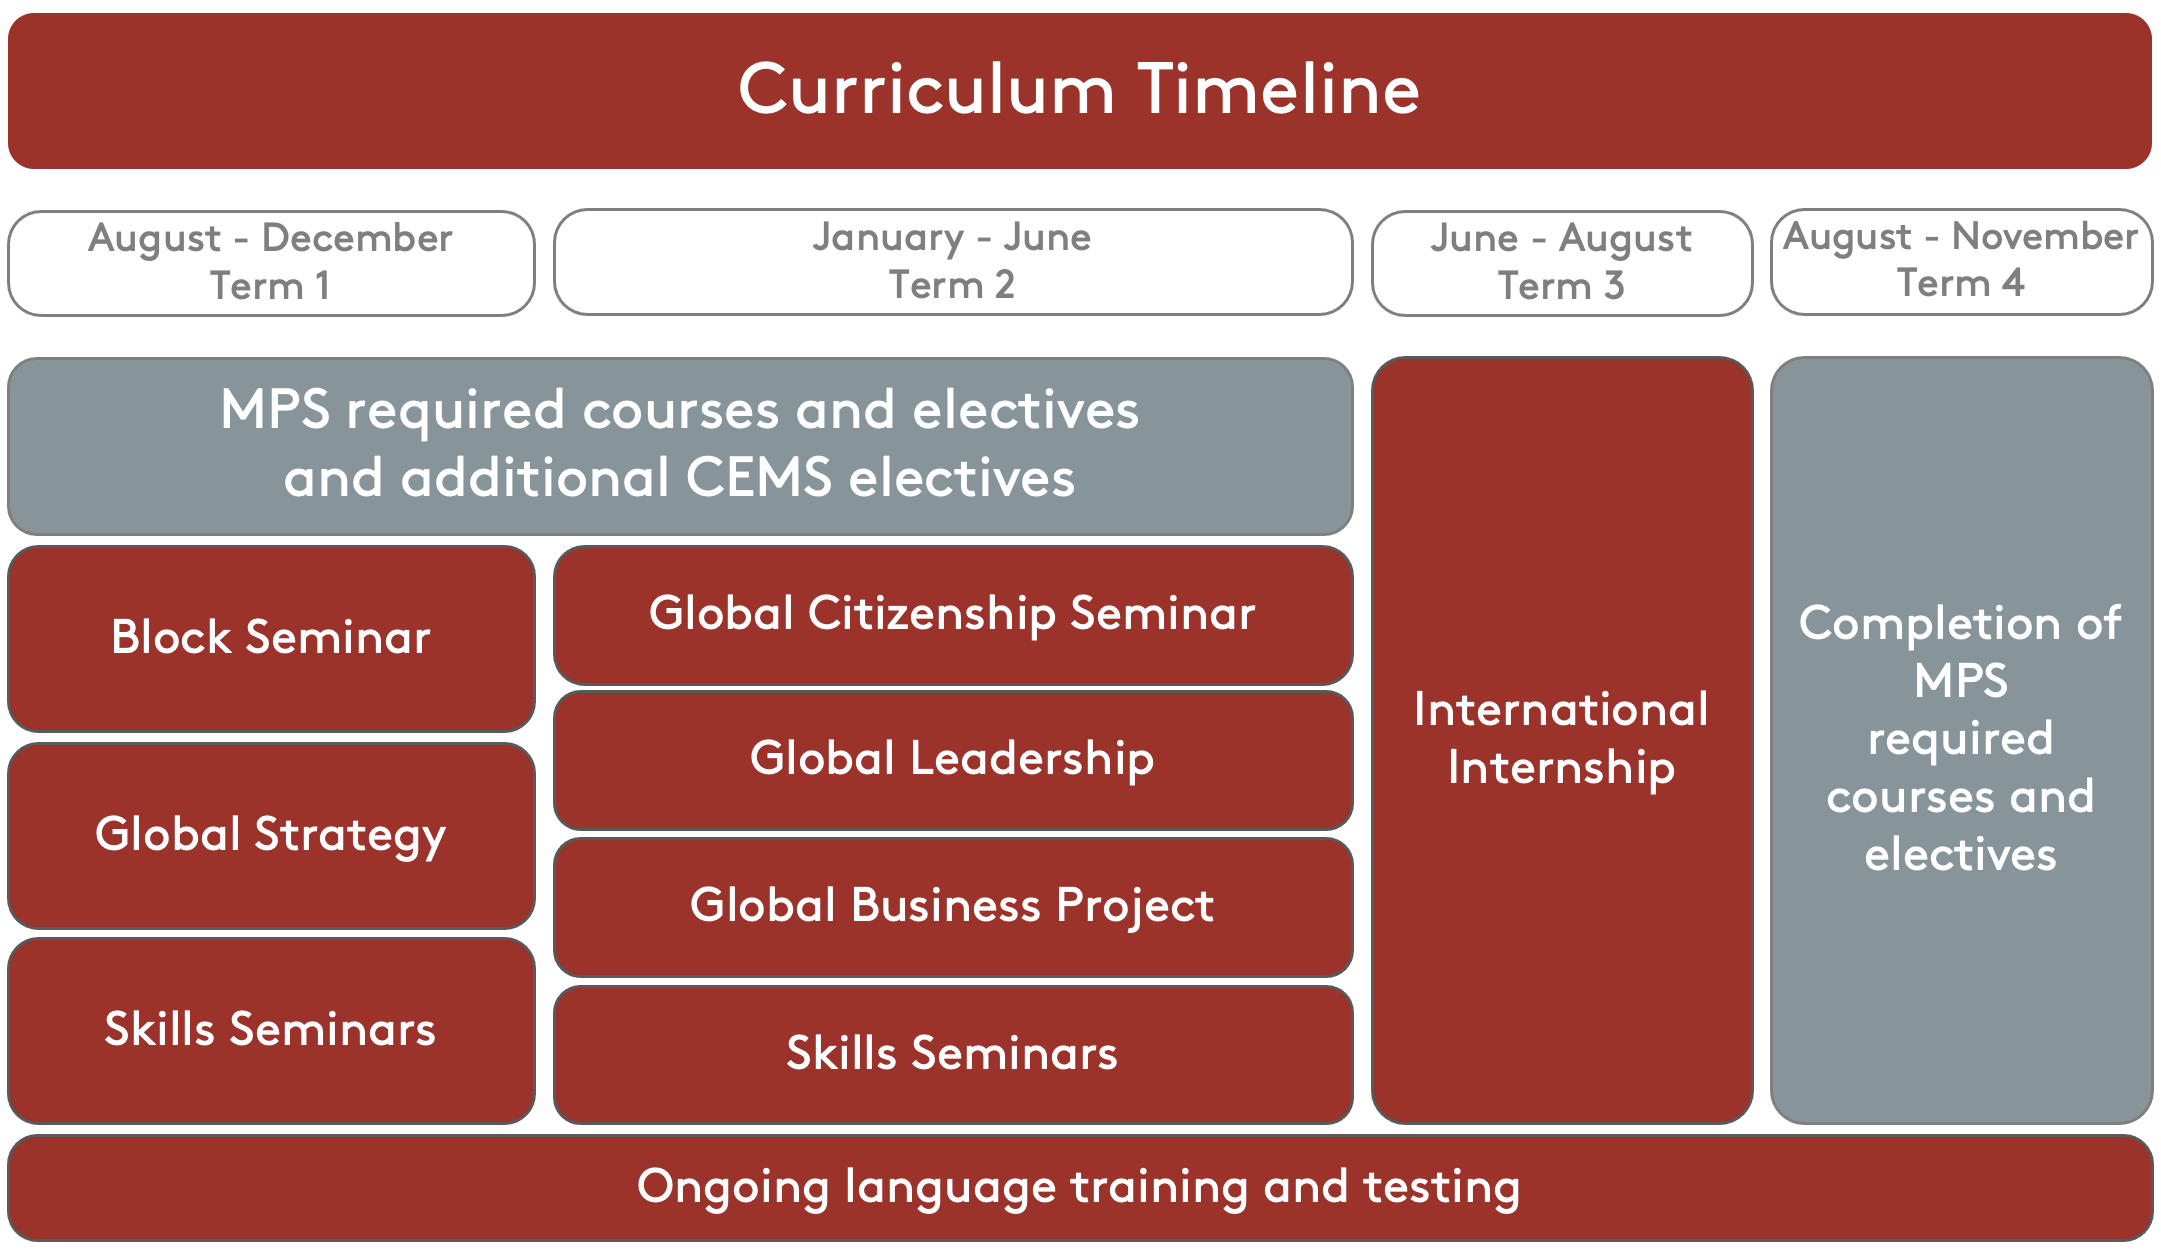 curriculum timeline for CEMS MIM at Cornell University